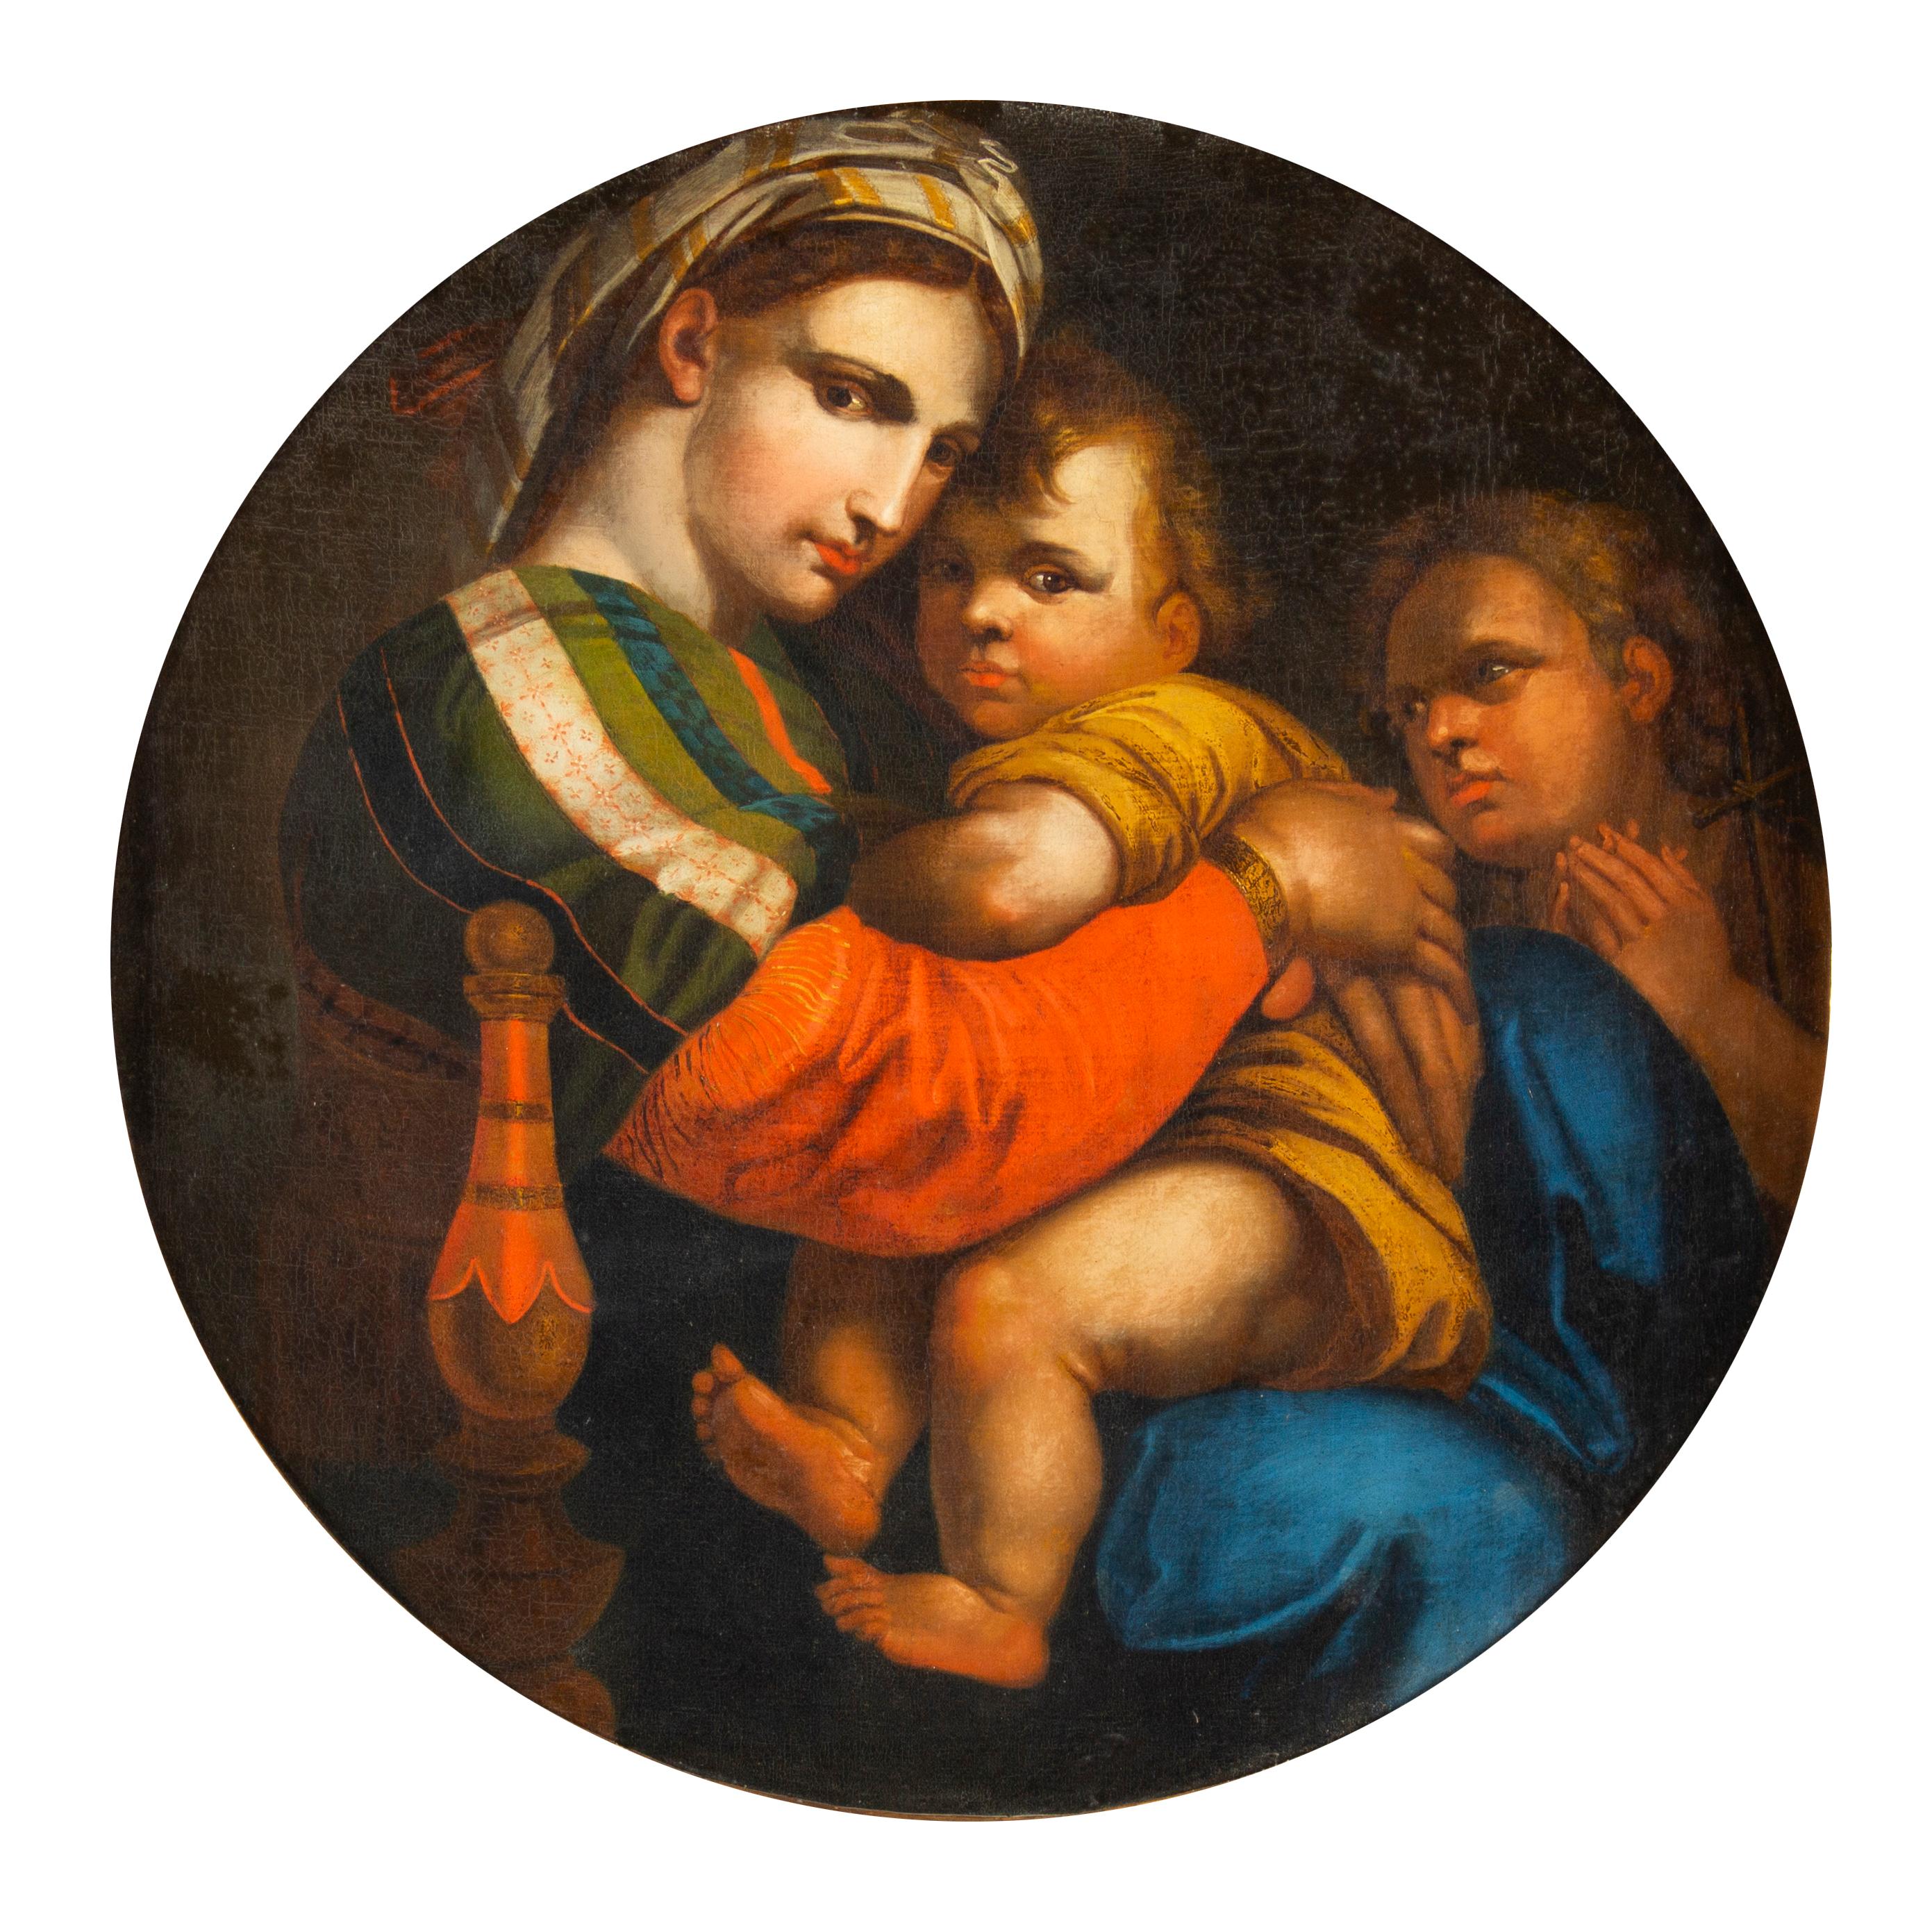 Raphael's Madonna della Sedia dates to 1513/14 and is kept in the Palazzo Pitti in Florence. Originally it was part of the Uffizi collection, and has then been brough to Paris during the storms of the Napoleonic wars. The tondo is rumoured to be